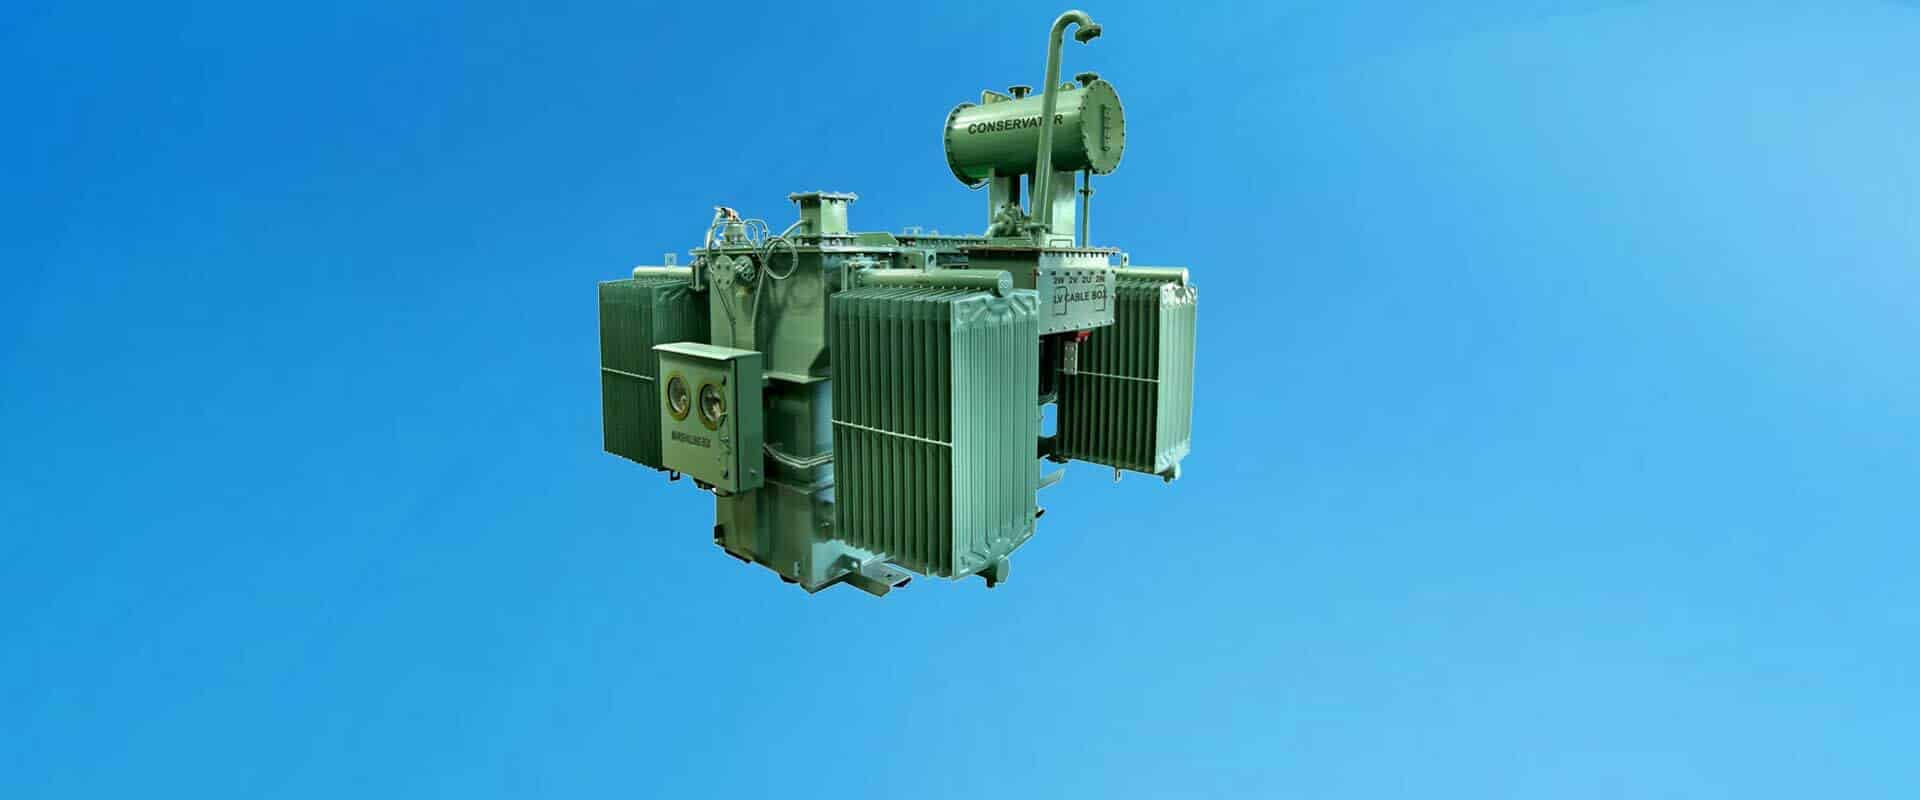 Top Transformer manufacturers and suppliers in India